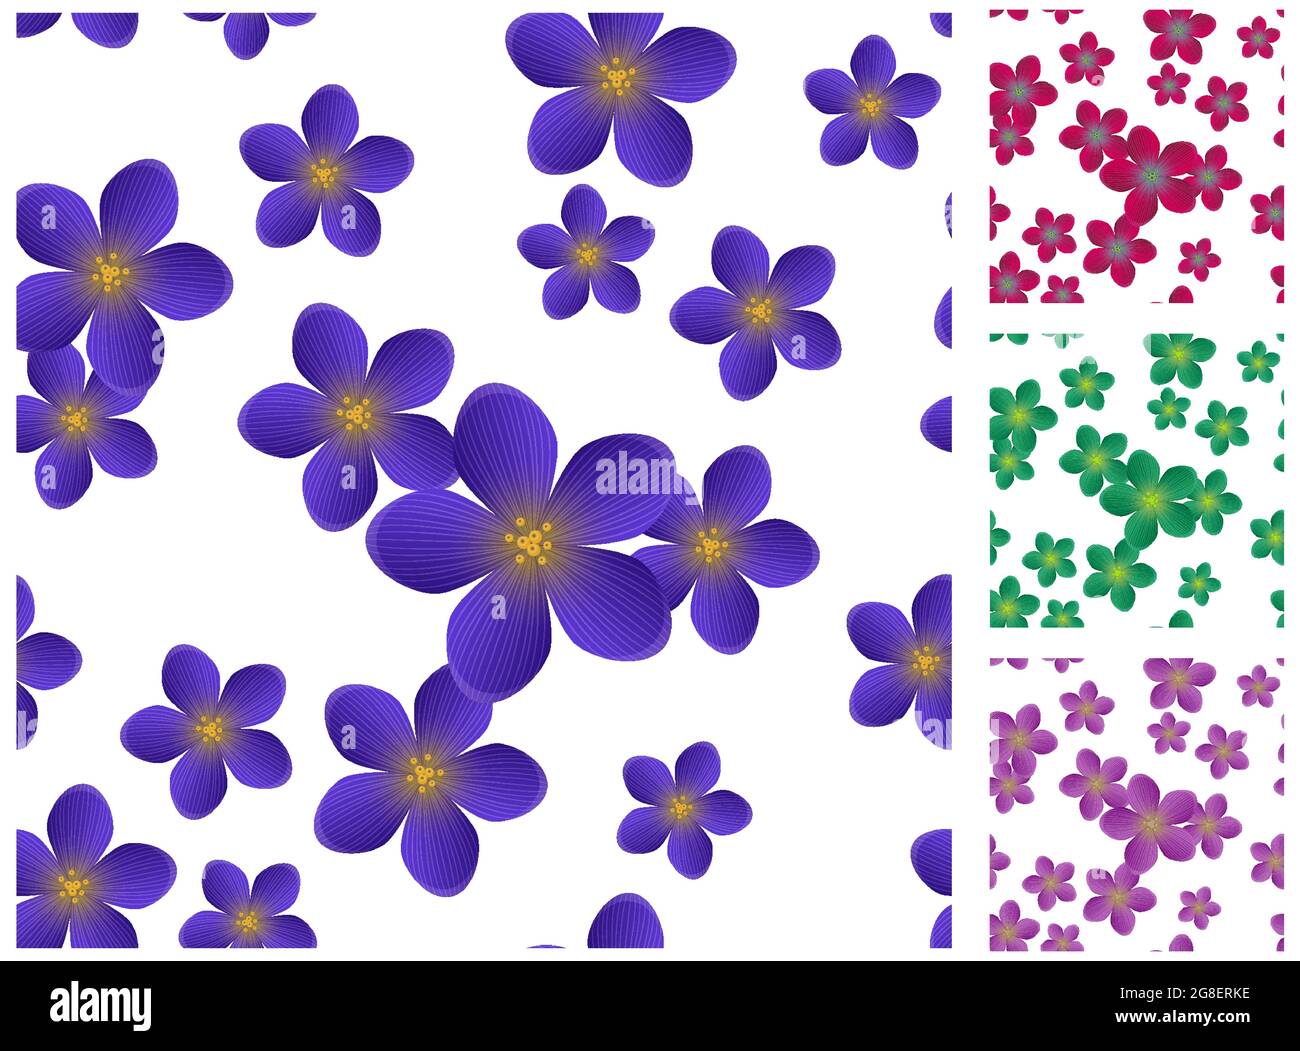 Flower floral pattern design pack including blue, violet, red maroon, green flowers. Set of 4 for print, textile, fabric Stock Vector